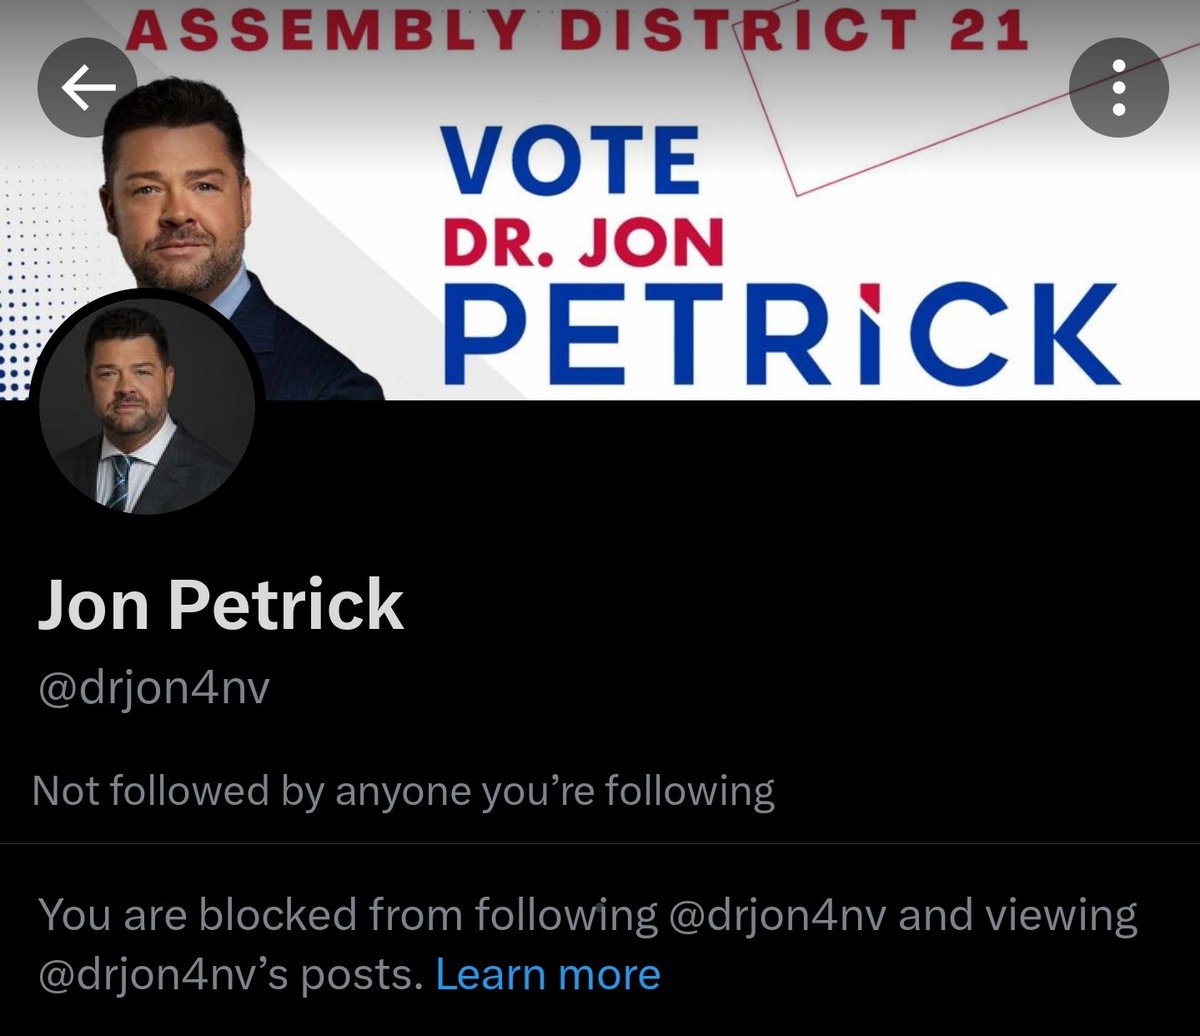 Seems @drjon4nv is only a tough guy when the steroids+whiskey makes him frisky. This is not a First Amendment violation because he will never be elected, just a narcissistic asshole. #nvleg #ad21 #hgh #steroids #baddrunk #PPPFraud #FiresPregnantWomen #womanizer